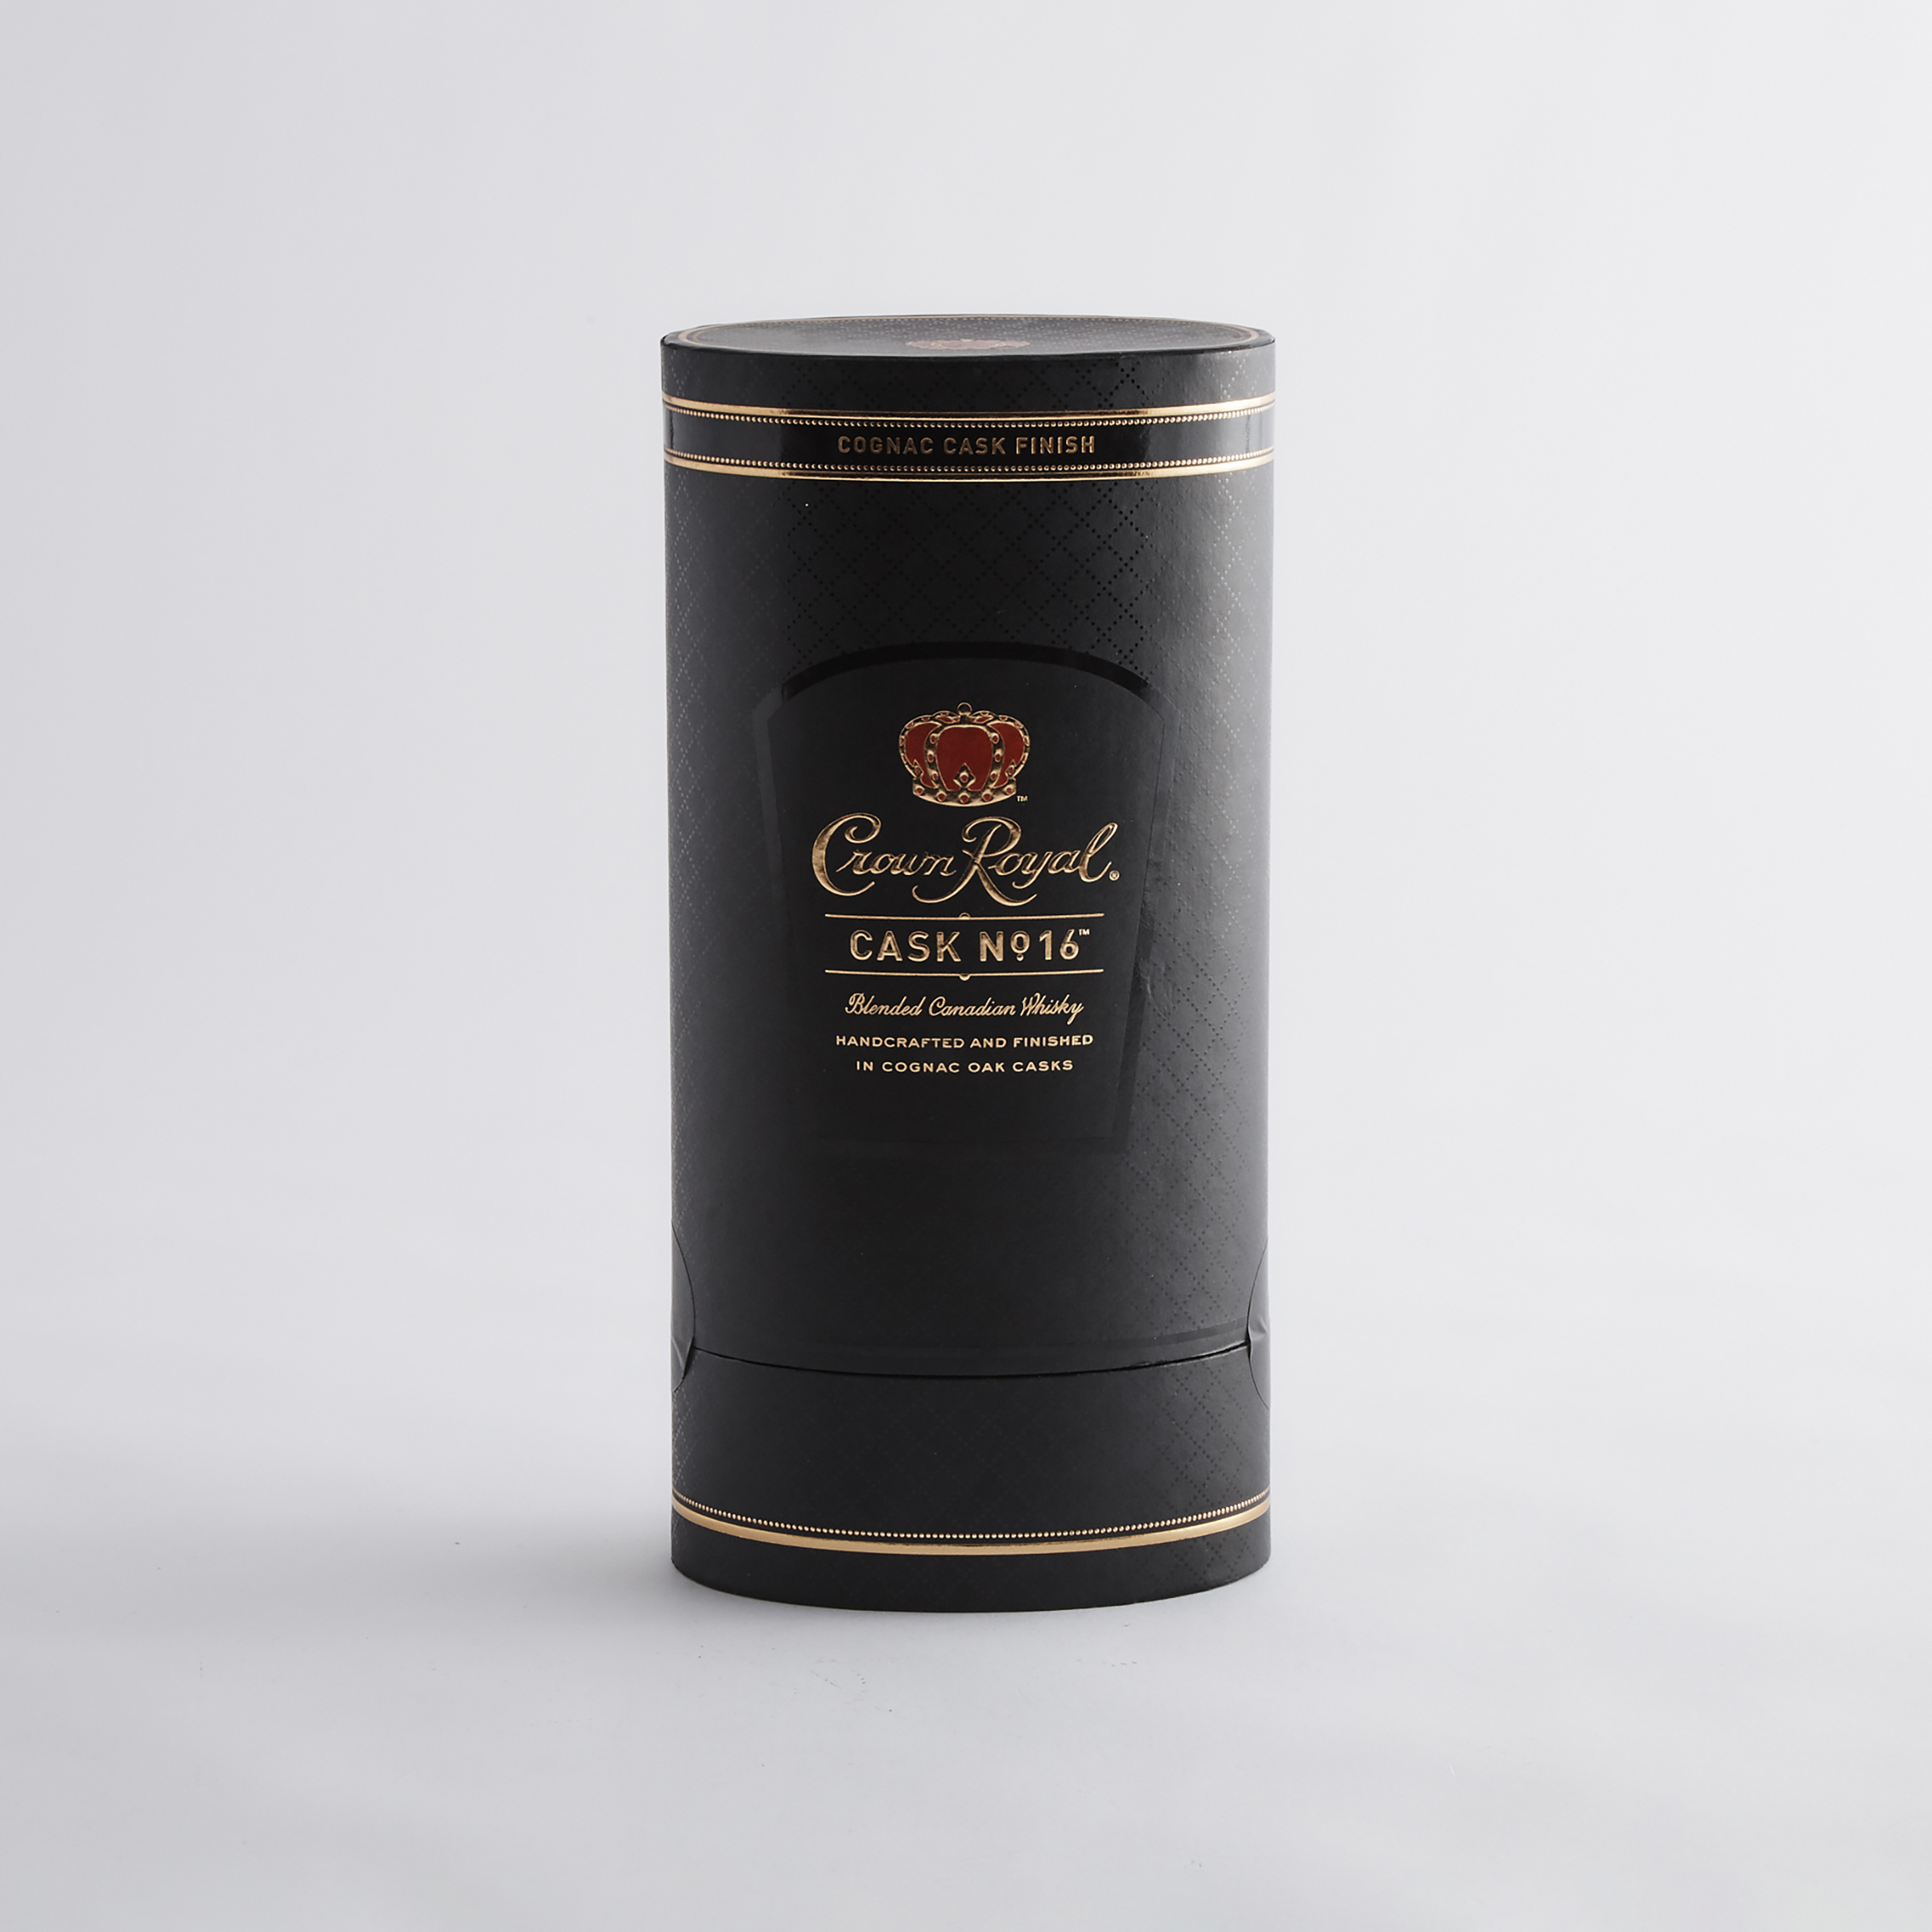 CROWN ROYAL BLENDED CANADIAN WHISKY CASK NO 16 (ONE 750 ML)